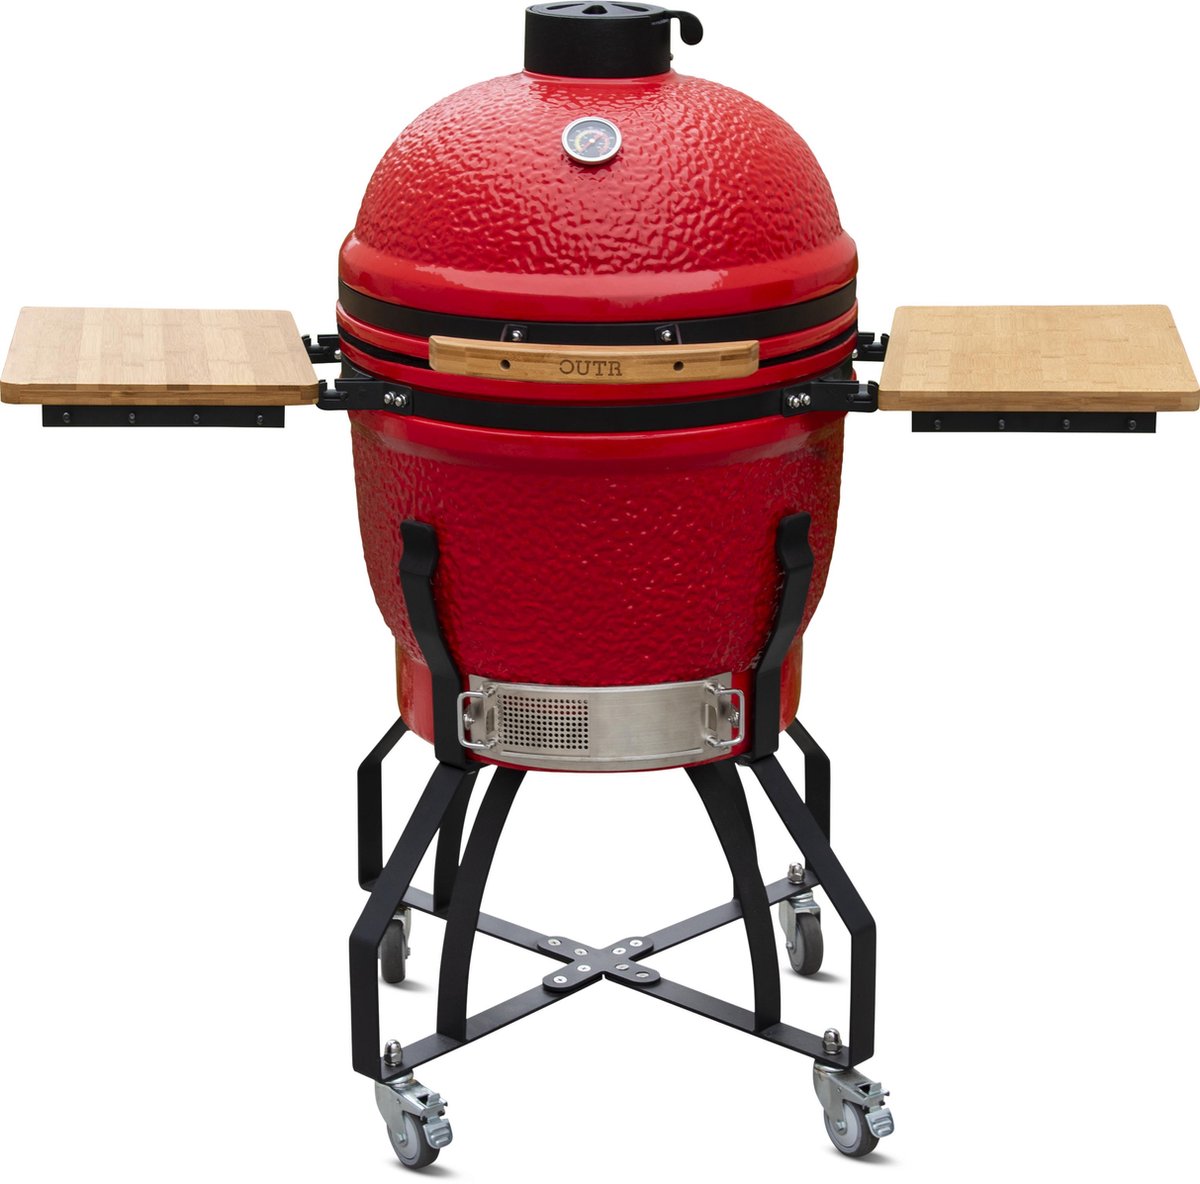 Outr Kamado Grill Large 55 - Rood